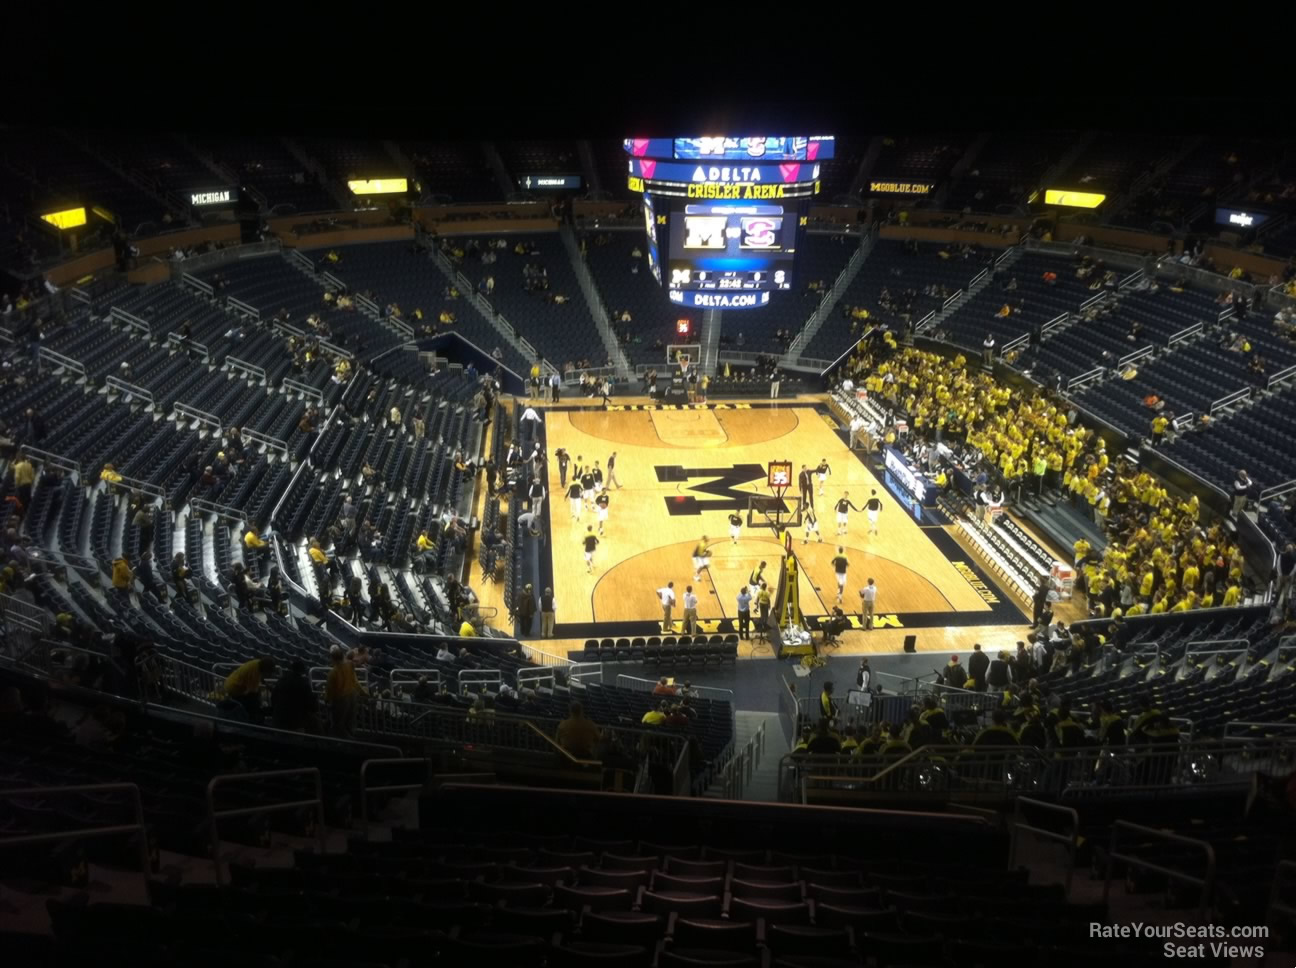 section 233, row 38 seat view  - crisler center